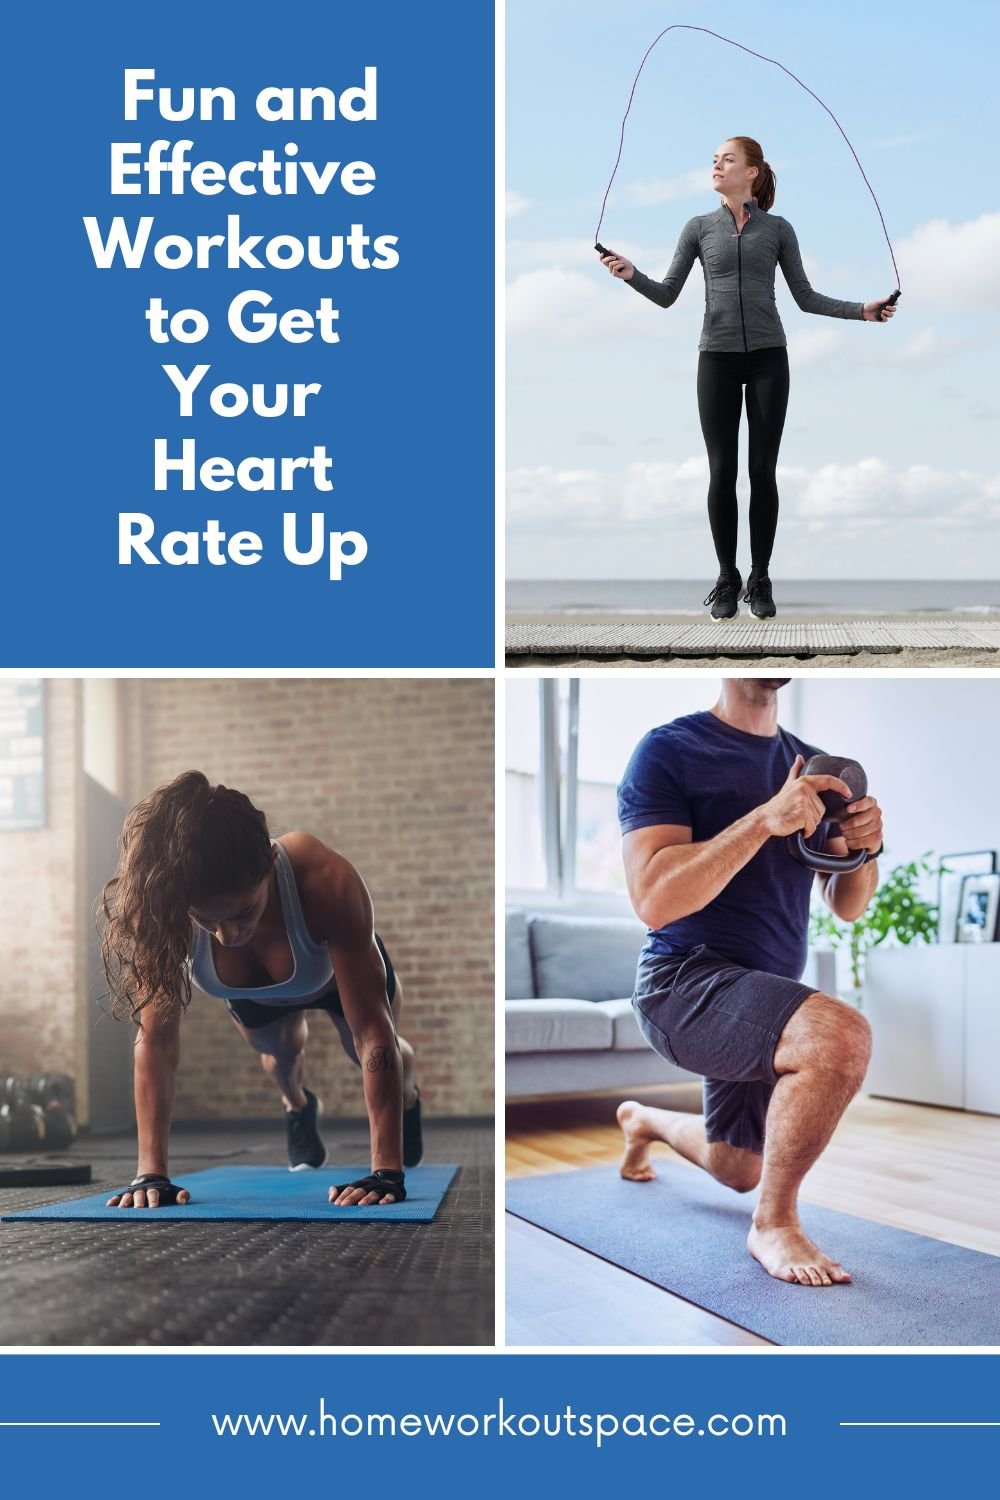 Fun and Effective Workouts to Get Your Heart Rate Up